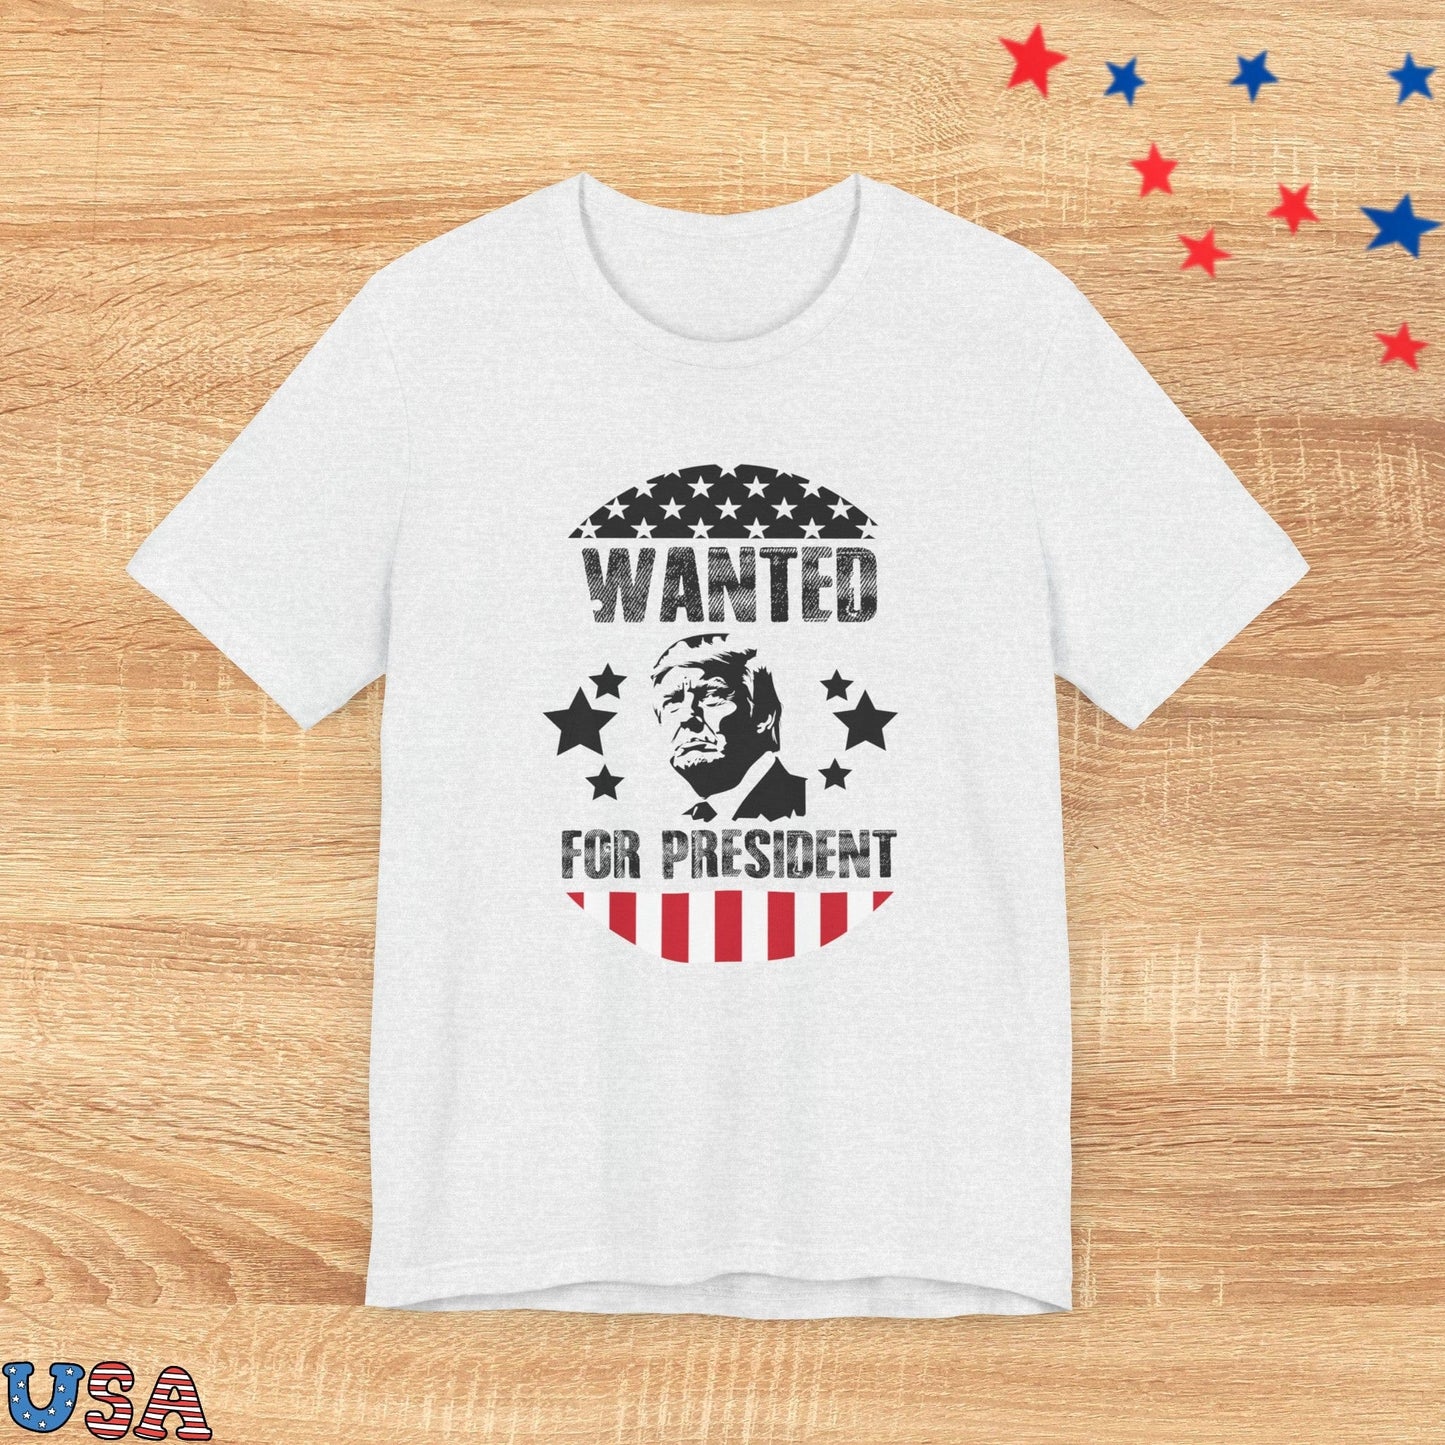 patriotic stars T-Shirt Ash / XS Wanted for President